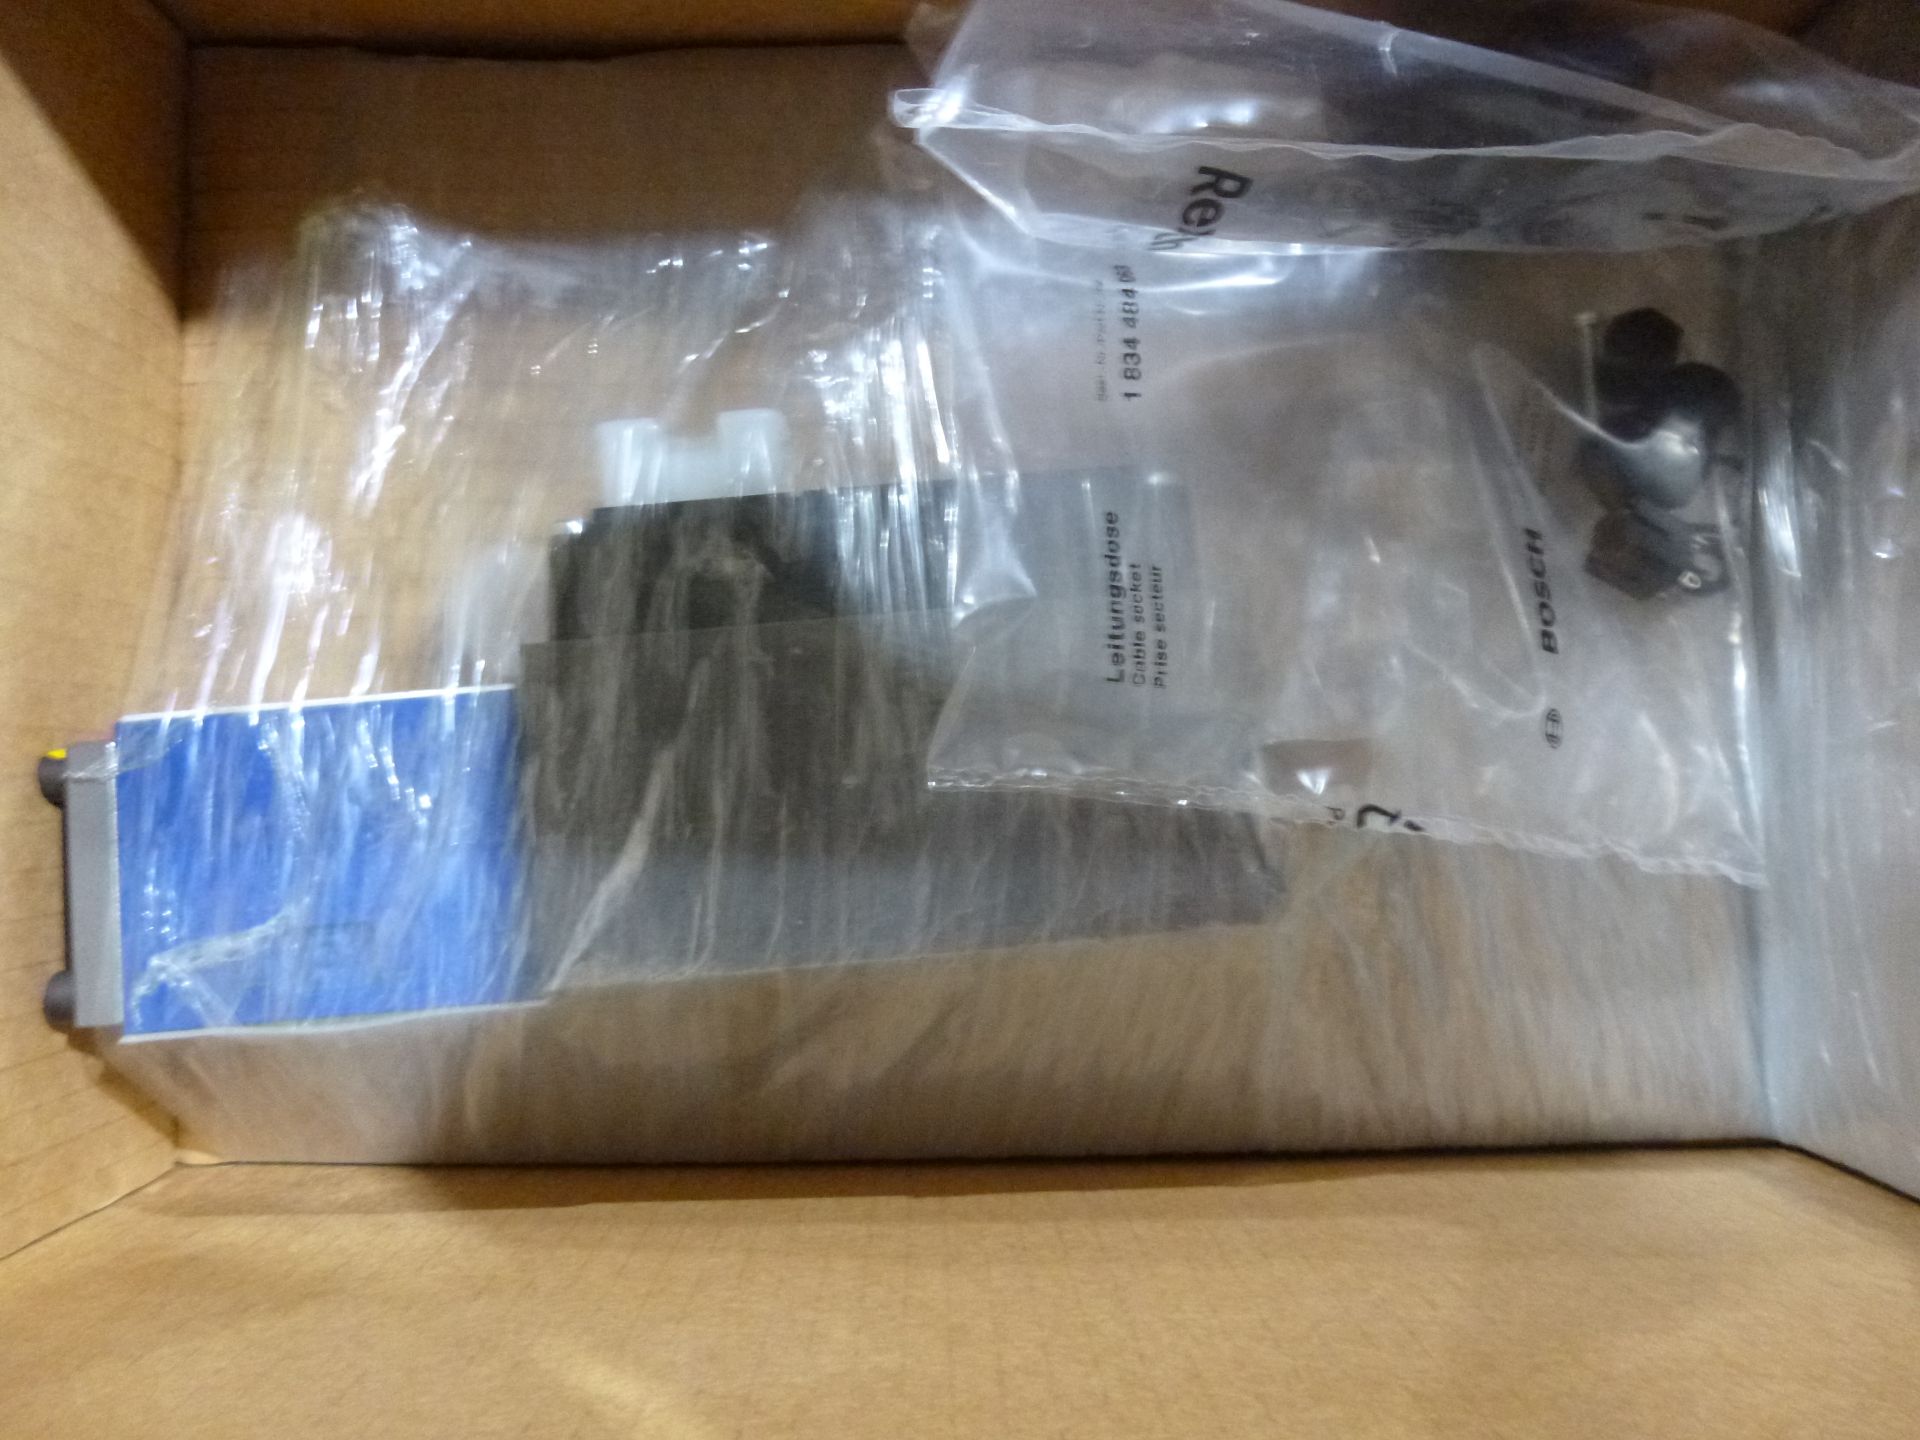 Rexroth valve part number 0811404039, new as pictured, as always with Brolyn LLC auctions, all - Image 3 of 3